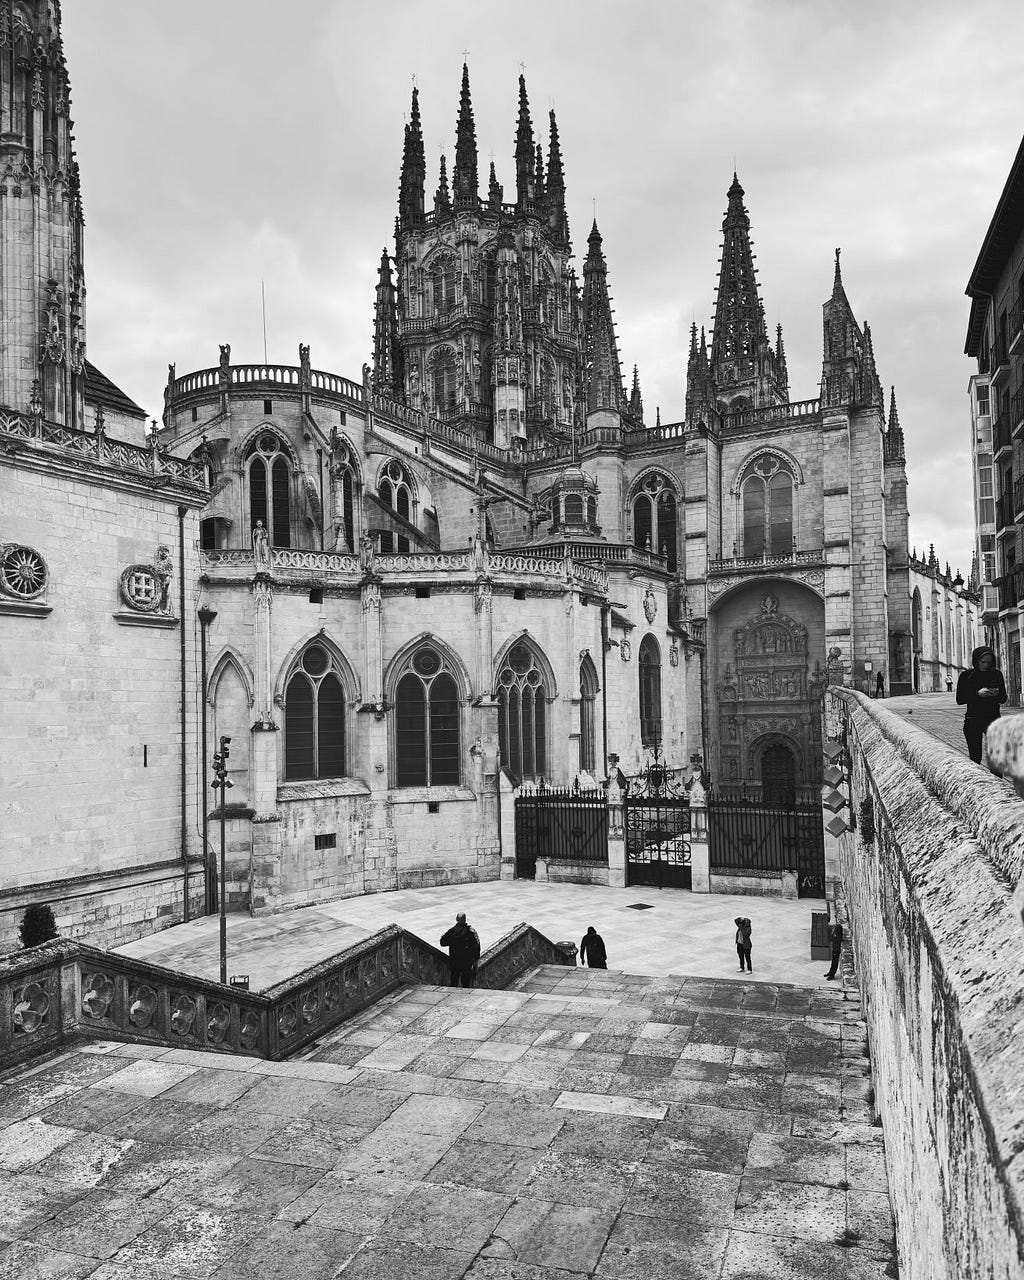 Black and white close-up photo of Gothic architecture of large Burgos Cathedral. We are looking at the side entrance with less elaborate ornamentation. The spires rise up in the background.